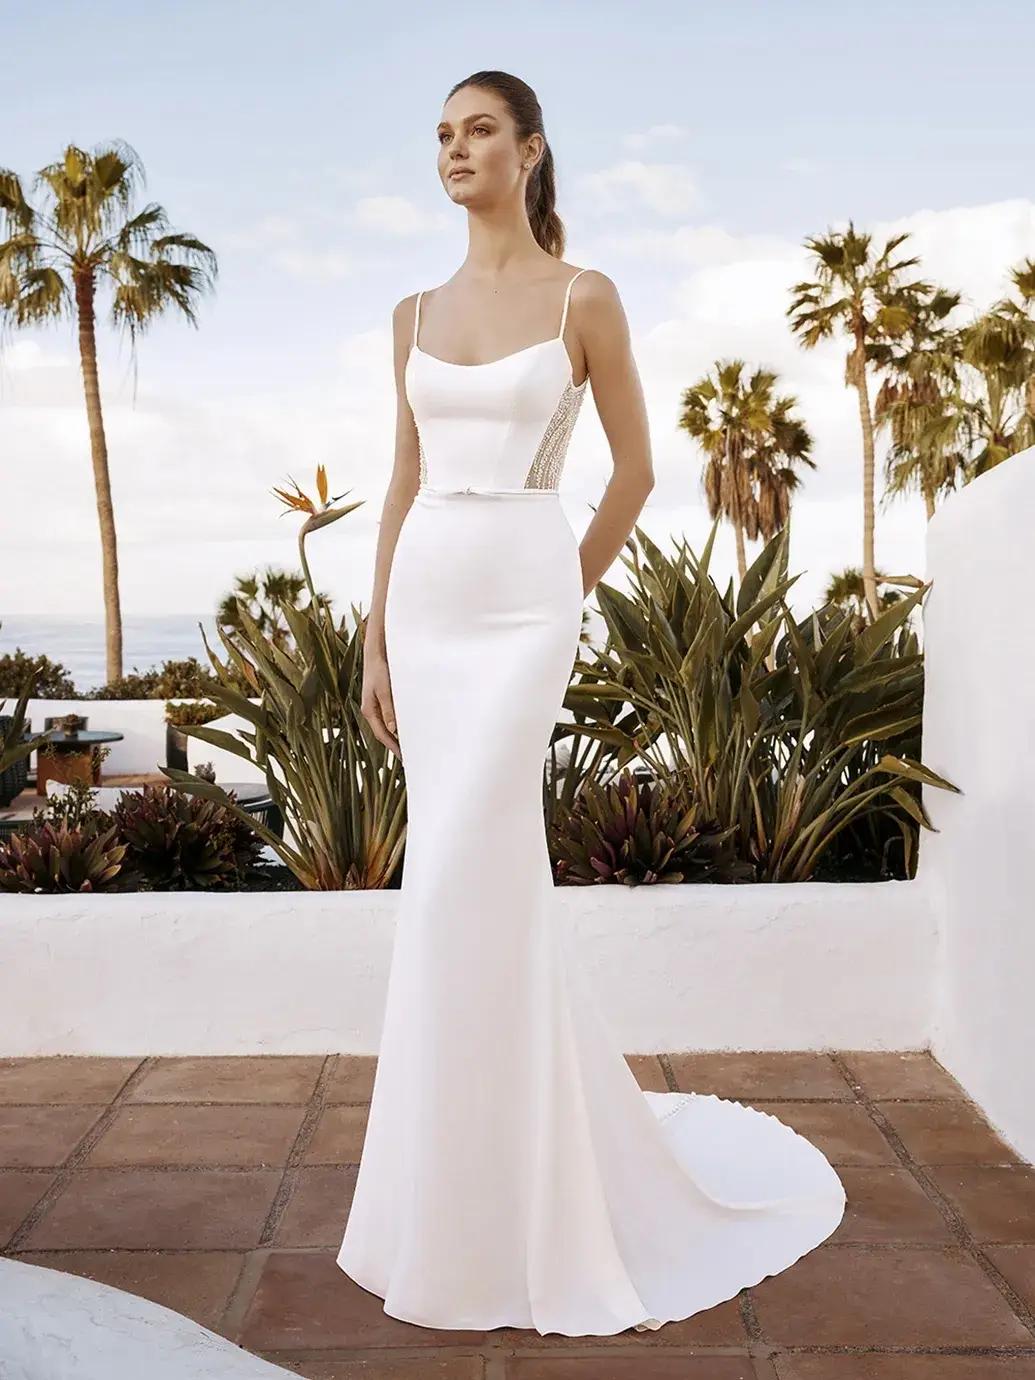 Luxurious Elegance:Timeless and Chic Wedding Gowns Image